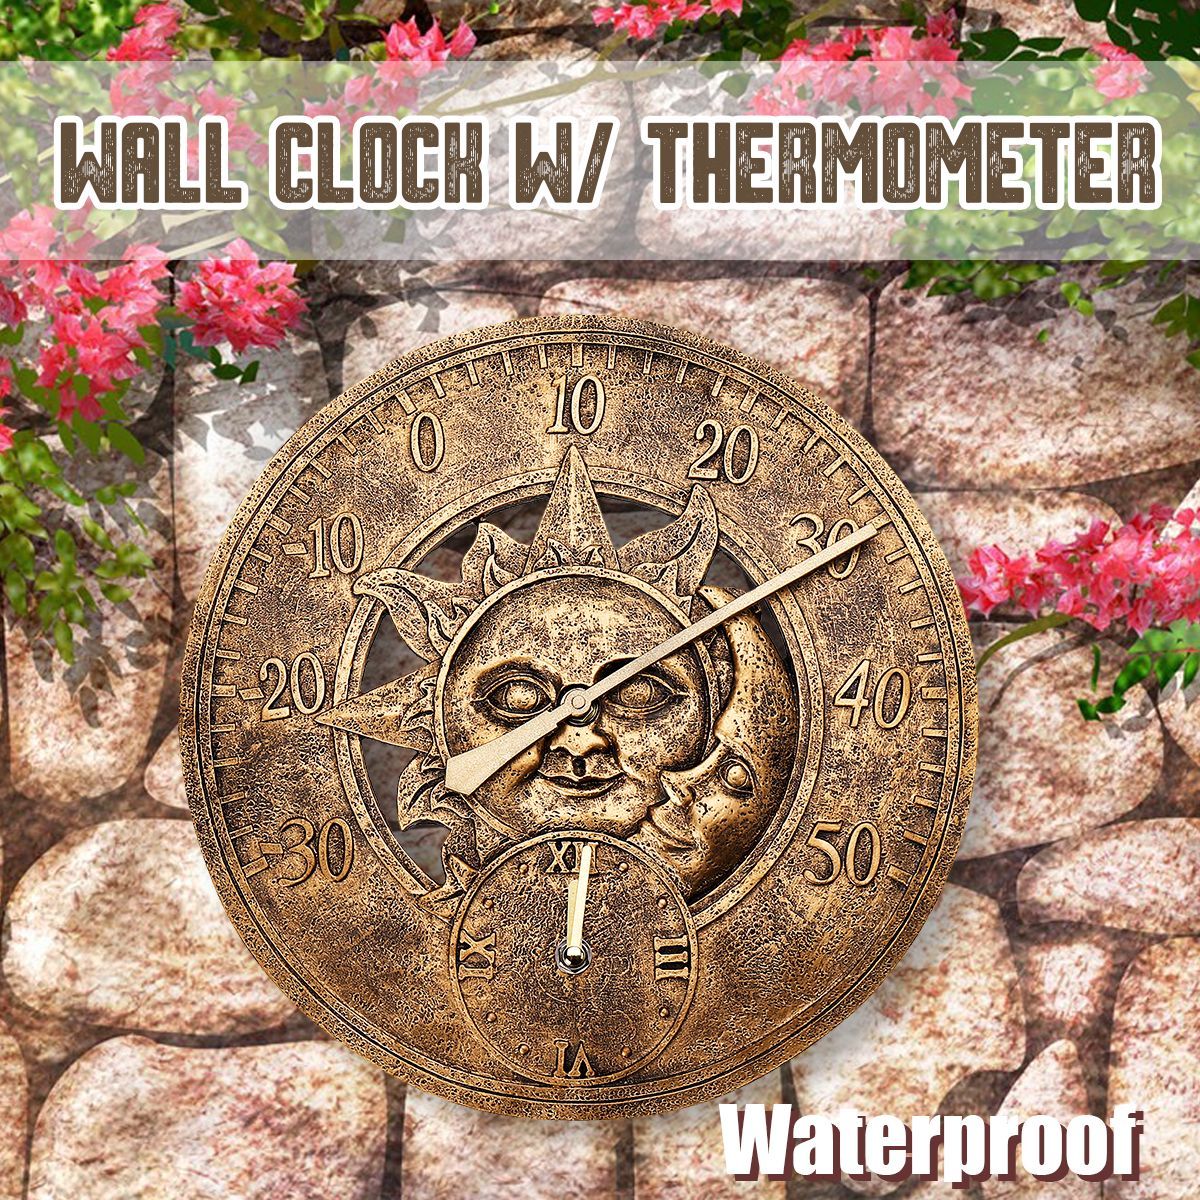 Waterproof-Outdoor-Indoor-Garden-Wall-Station-Clock-Thermometer-12-Inch-Sun-And-Moon-1579760